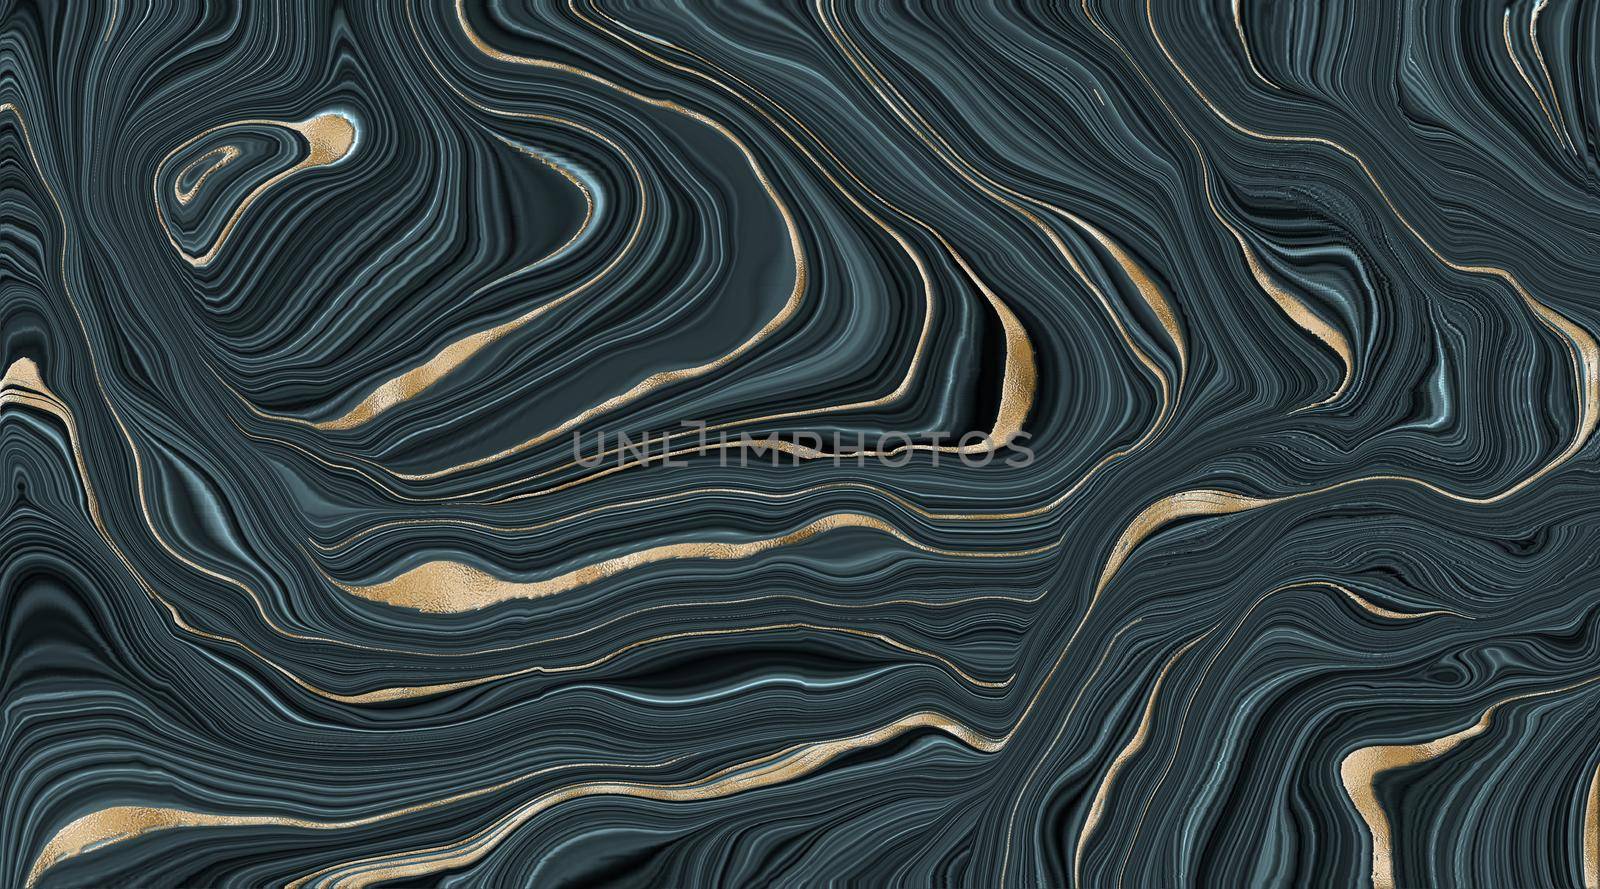 Abstract Agate Background. Green Agate stone texture with gold. Fluid marbling effect with gold vein. Illustration